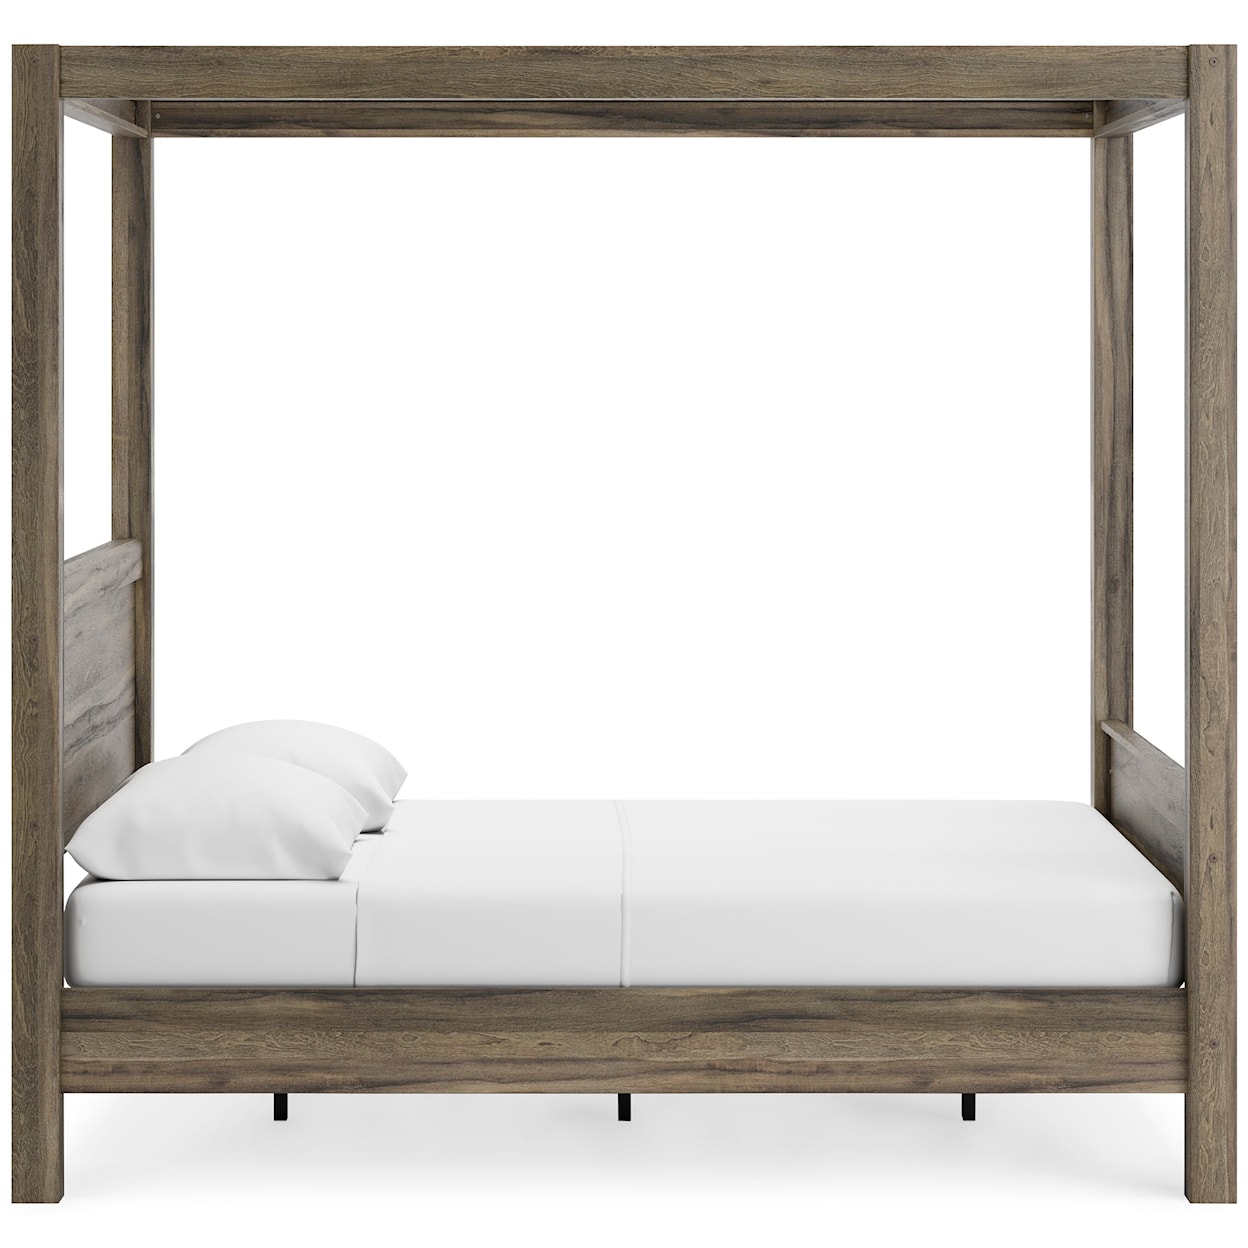 Signature Design by Ashley Shallifer Queen Canopy Bed